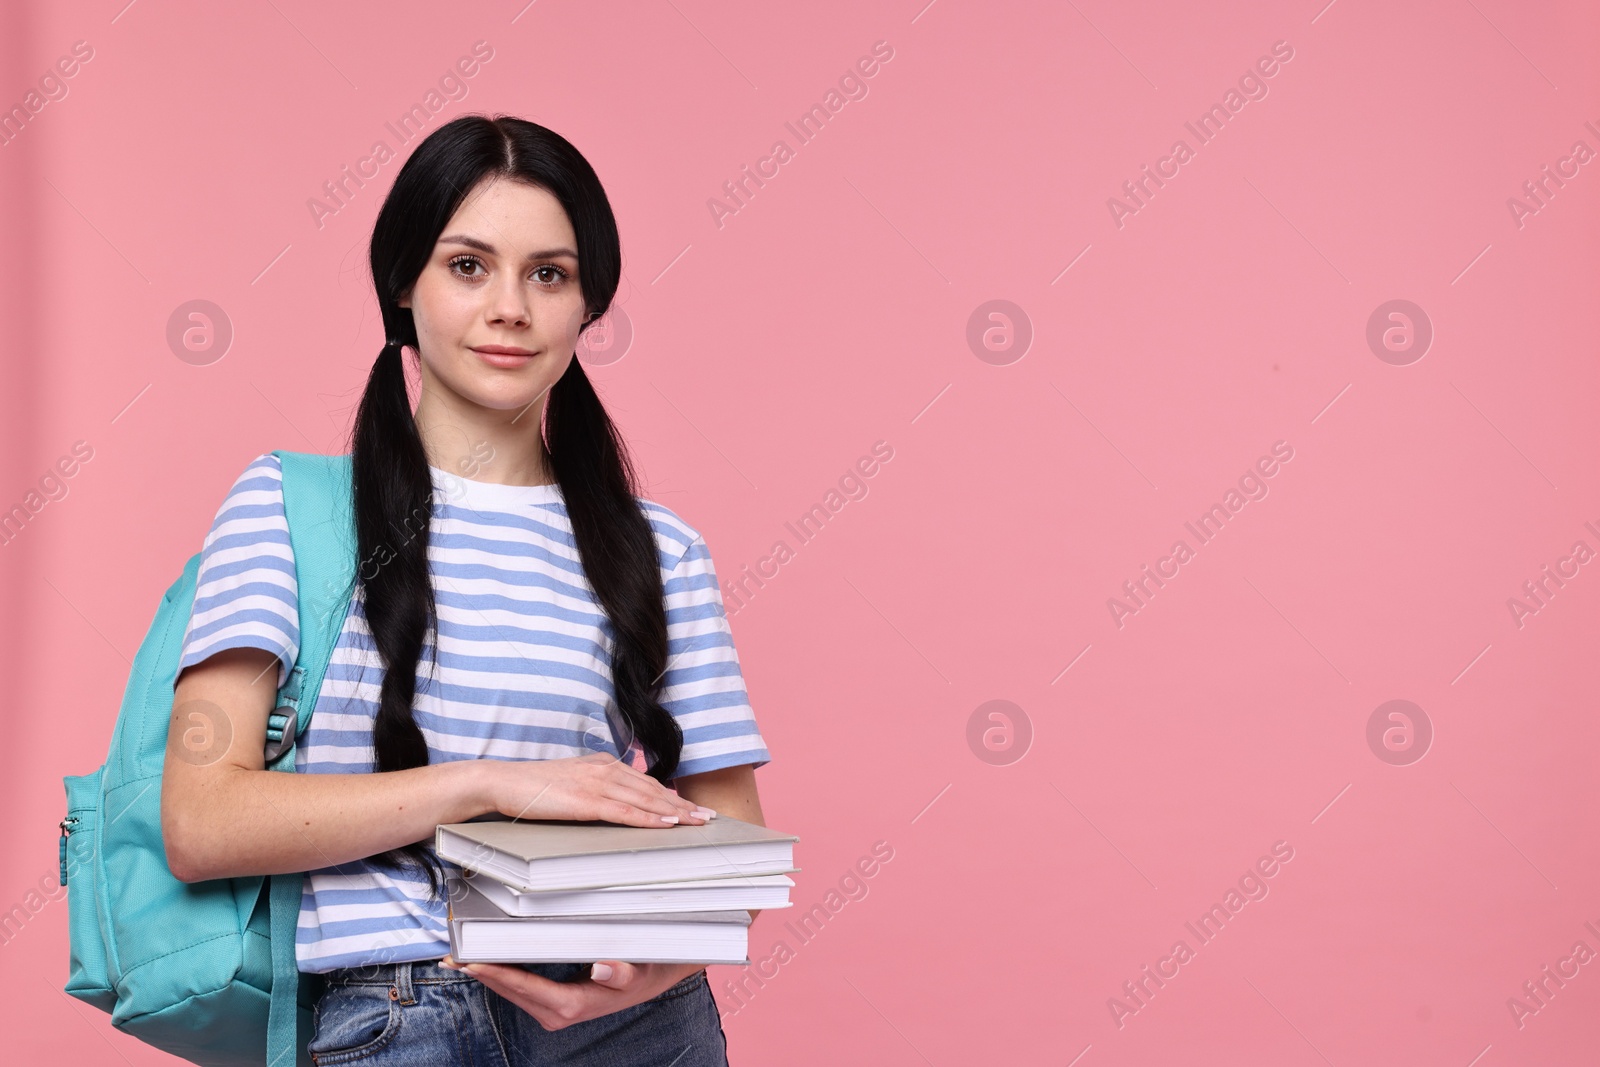 Photo of Student with books and backpack on pink background. Space for text